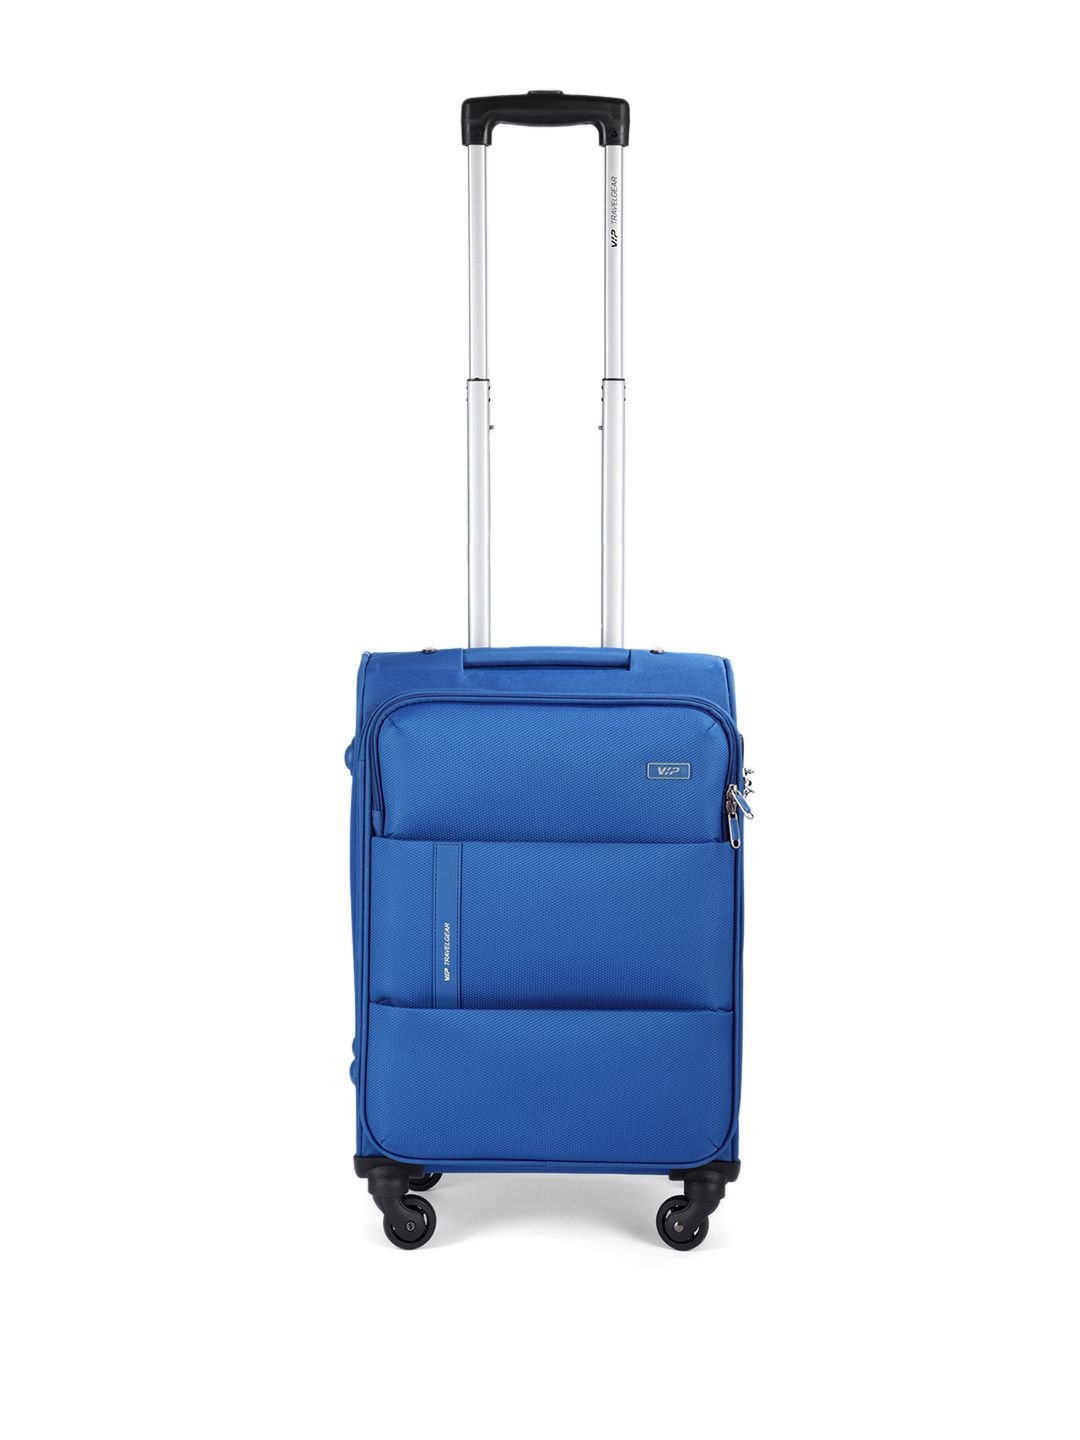 VIP Unisex Blue Small Widget STR Trolley Suitcase Price in India